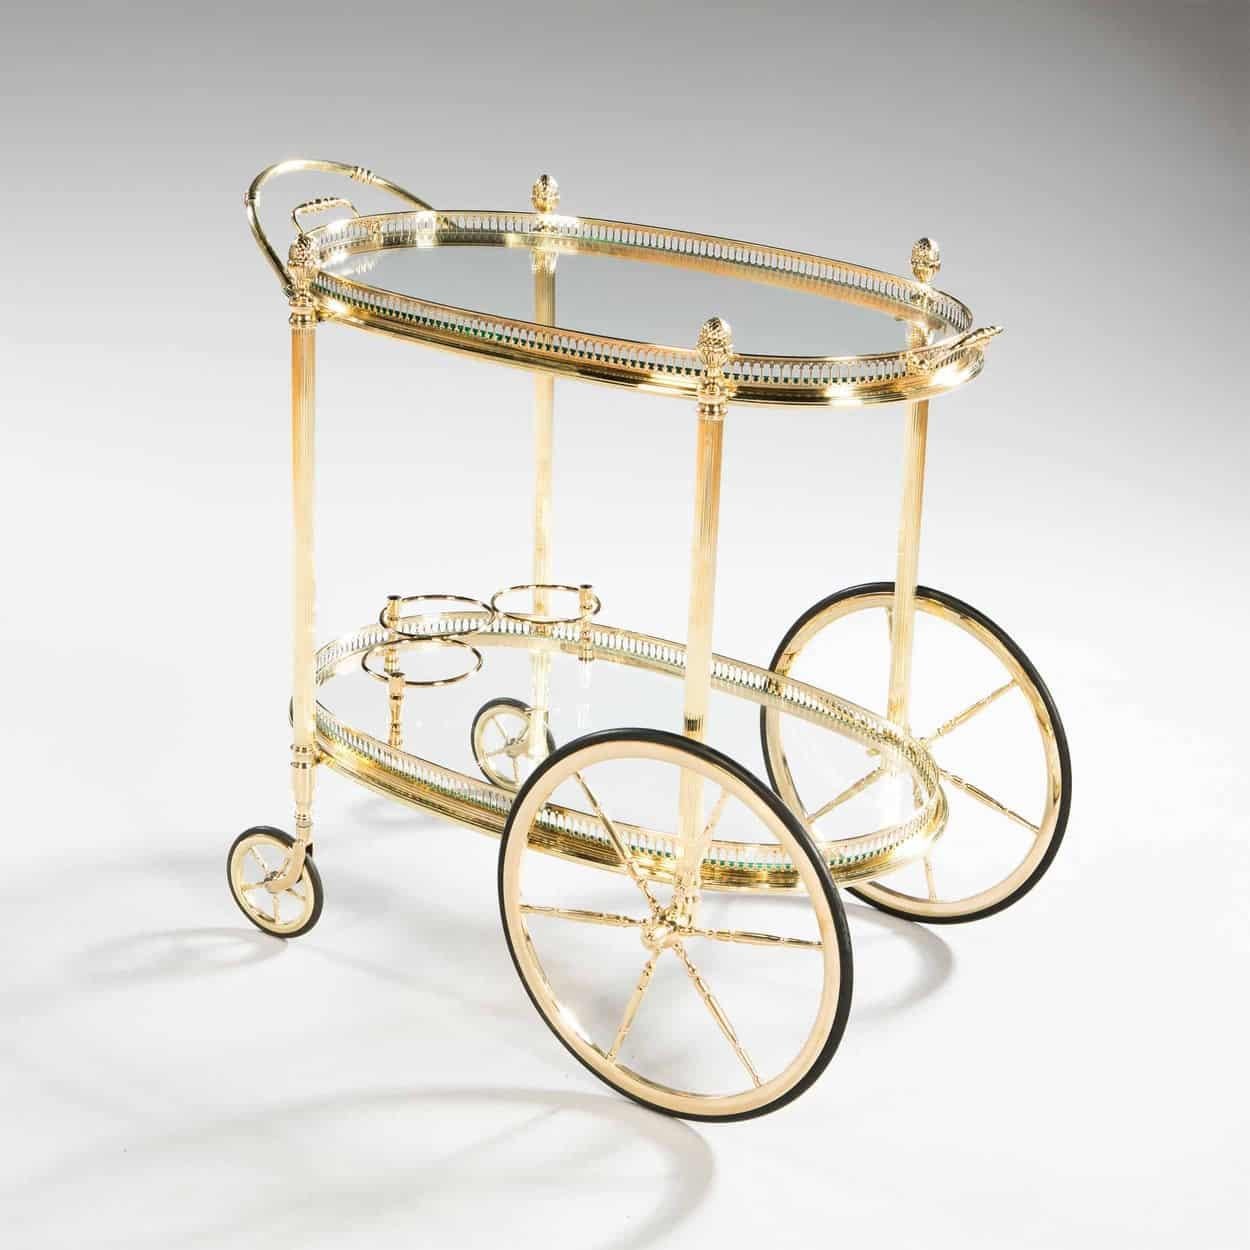 A fabulous and rare Maison Jansen oval polished brass bar cart. 

All of our bar carts are burnished and lacquered to protect the surfaces, we have also replaced the glass tops which often have chips and scratches. They are all taken apart,